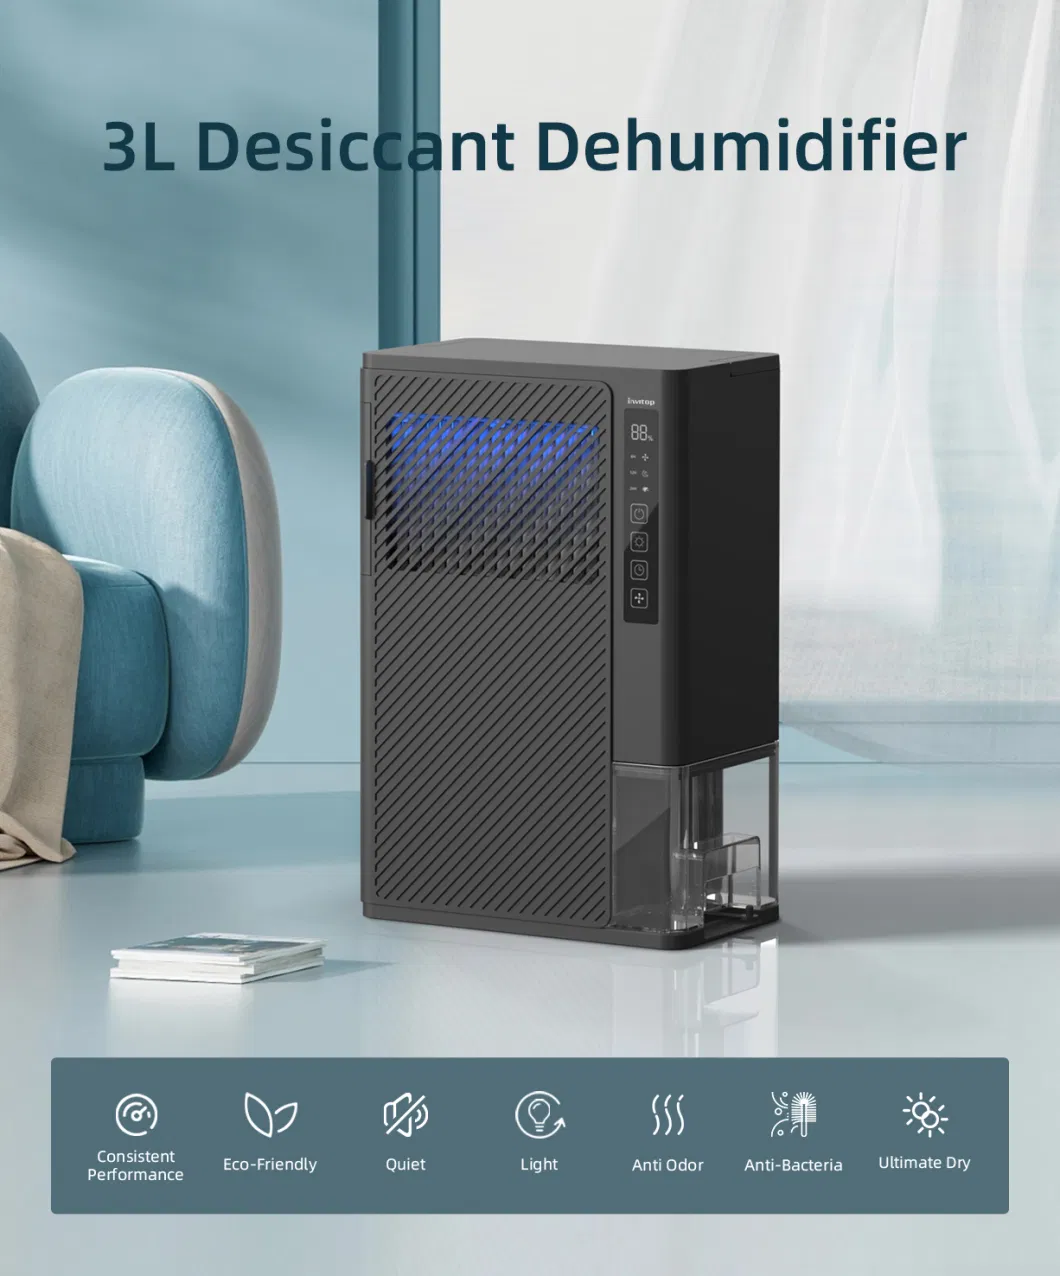 9L Pet Dehumidifying Dryer for Room Mini 12V with HEPA Filter Desiccant Dehumidifier